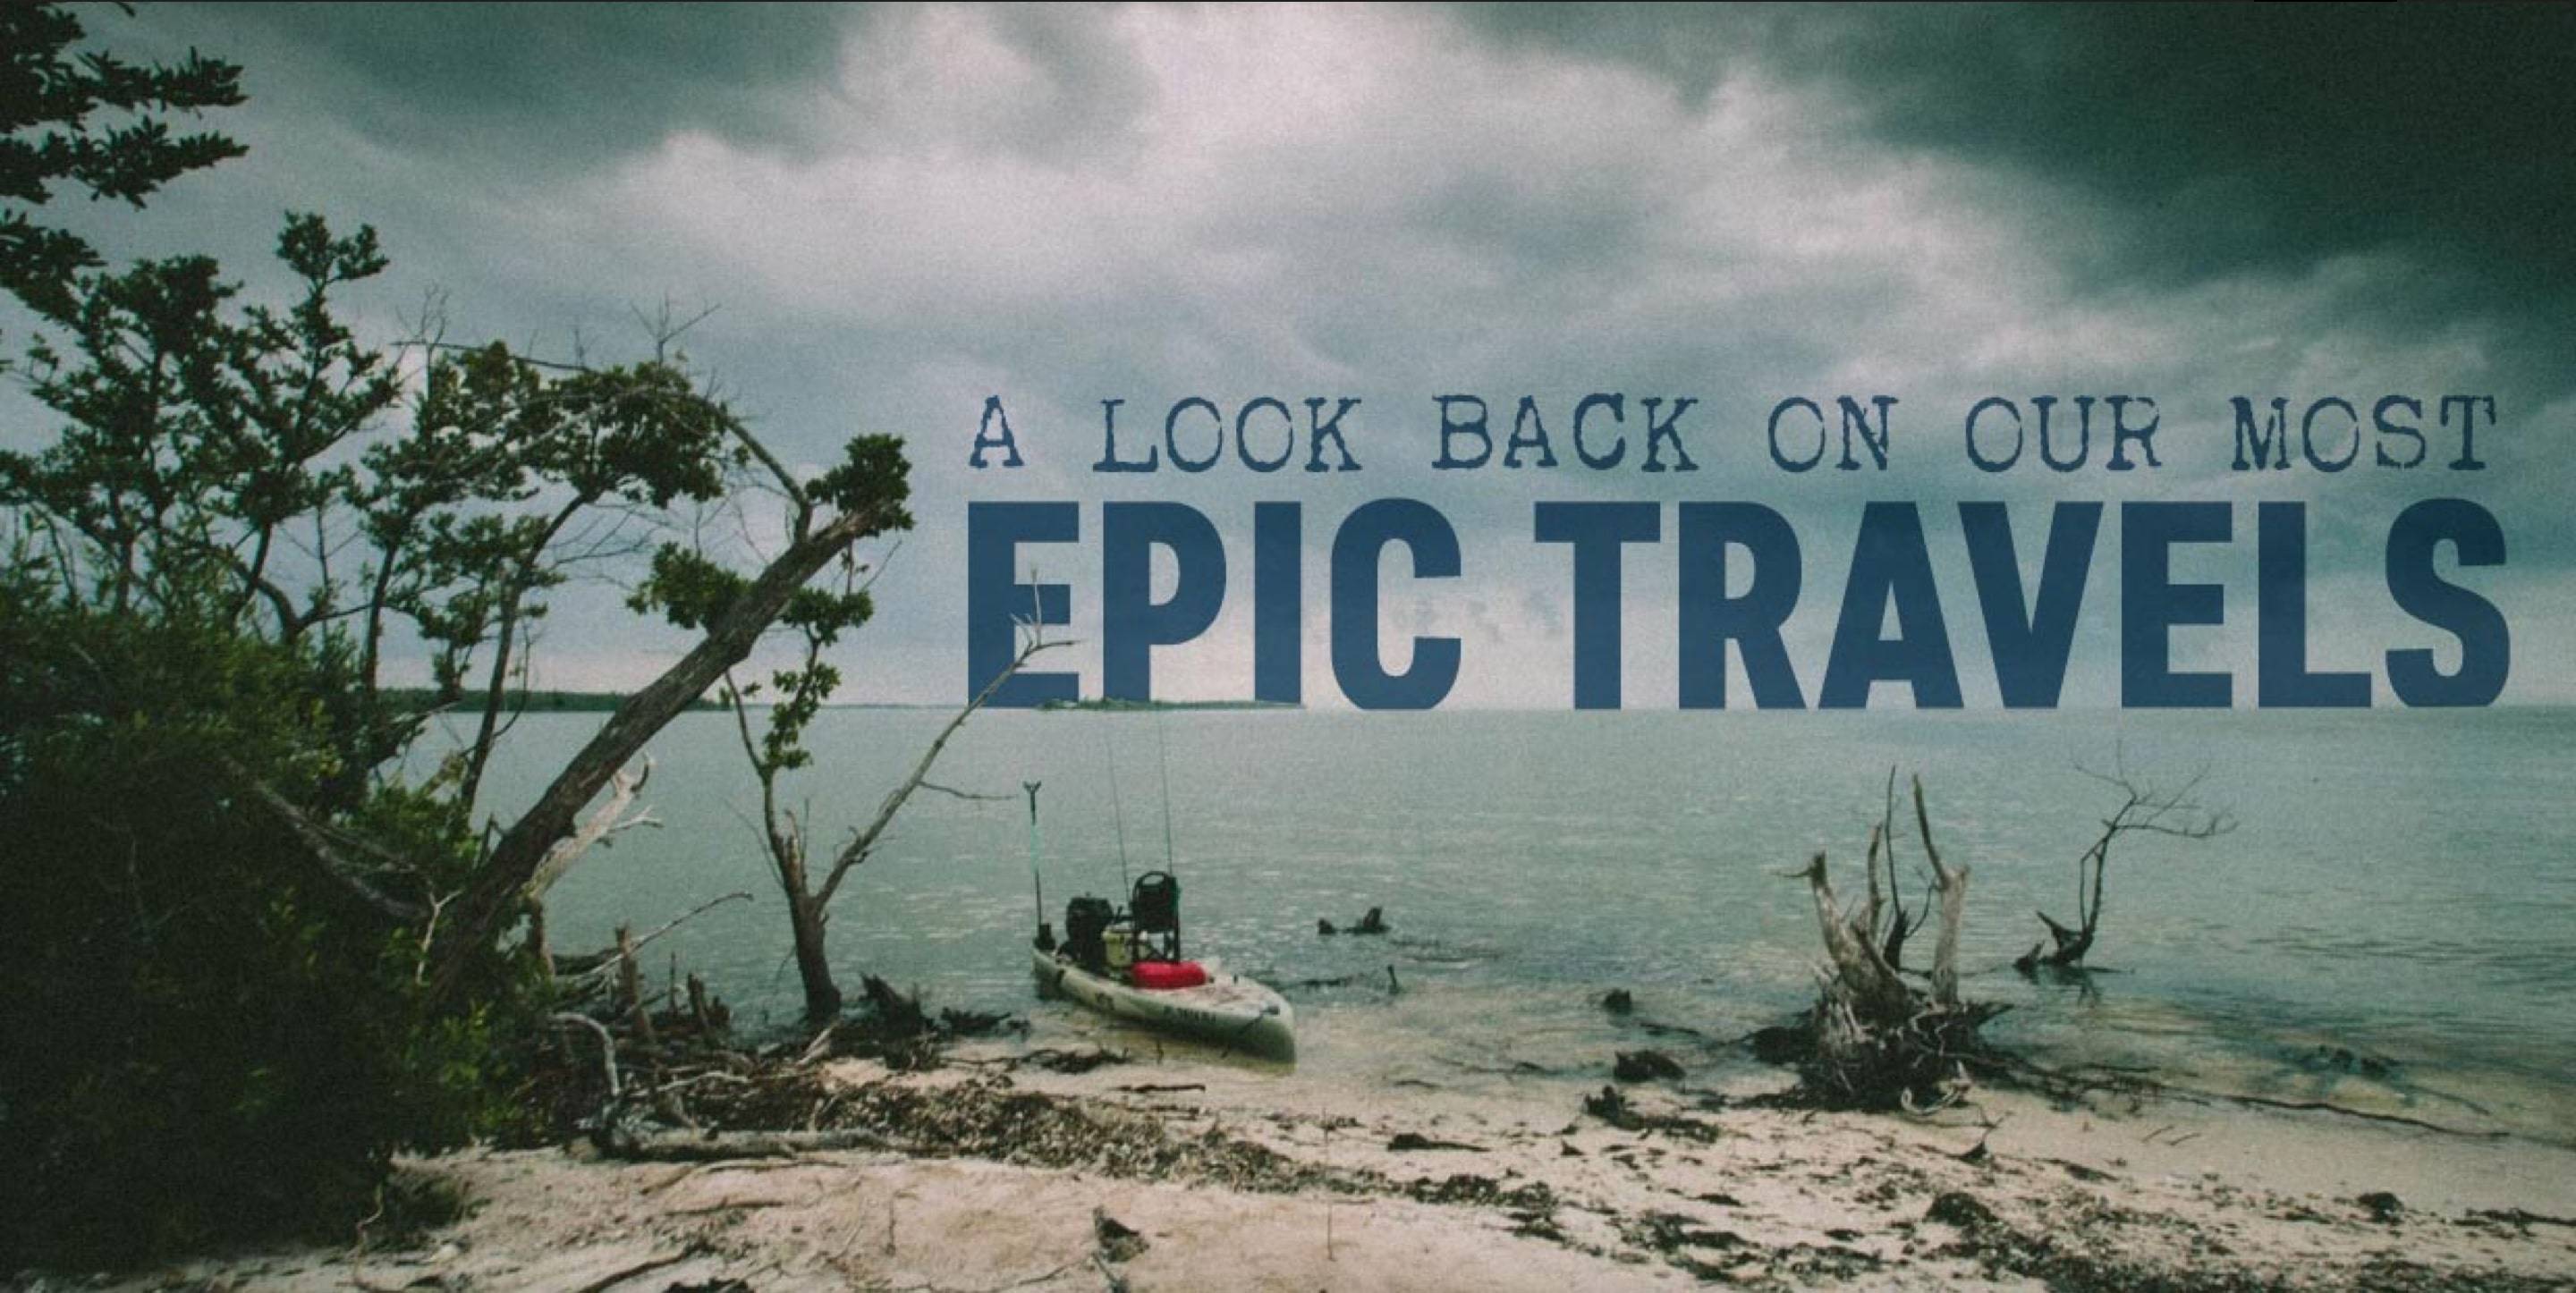 BOTE Presents: A Look Back on Our Most Epic Travels